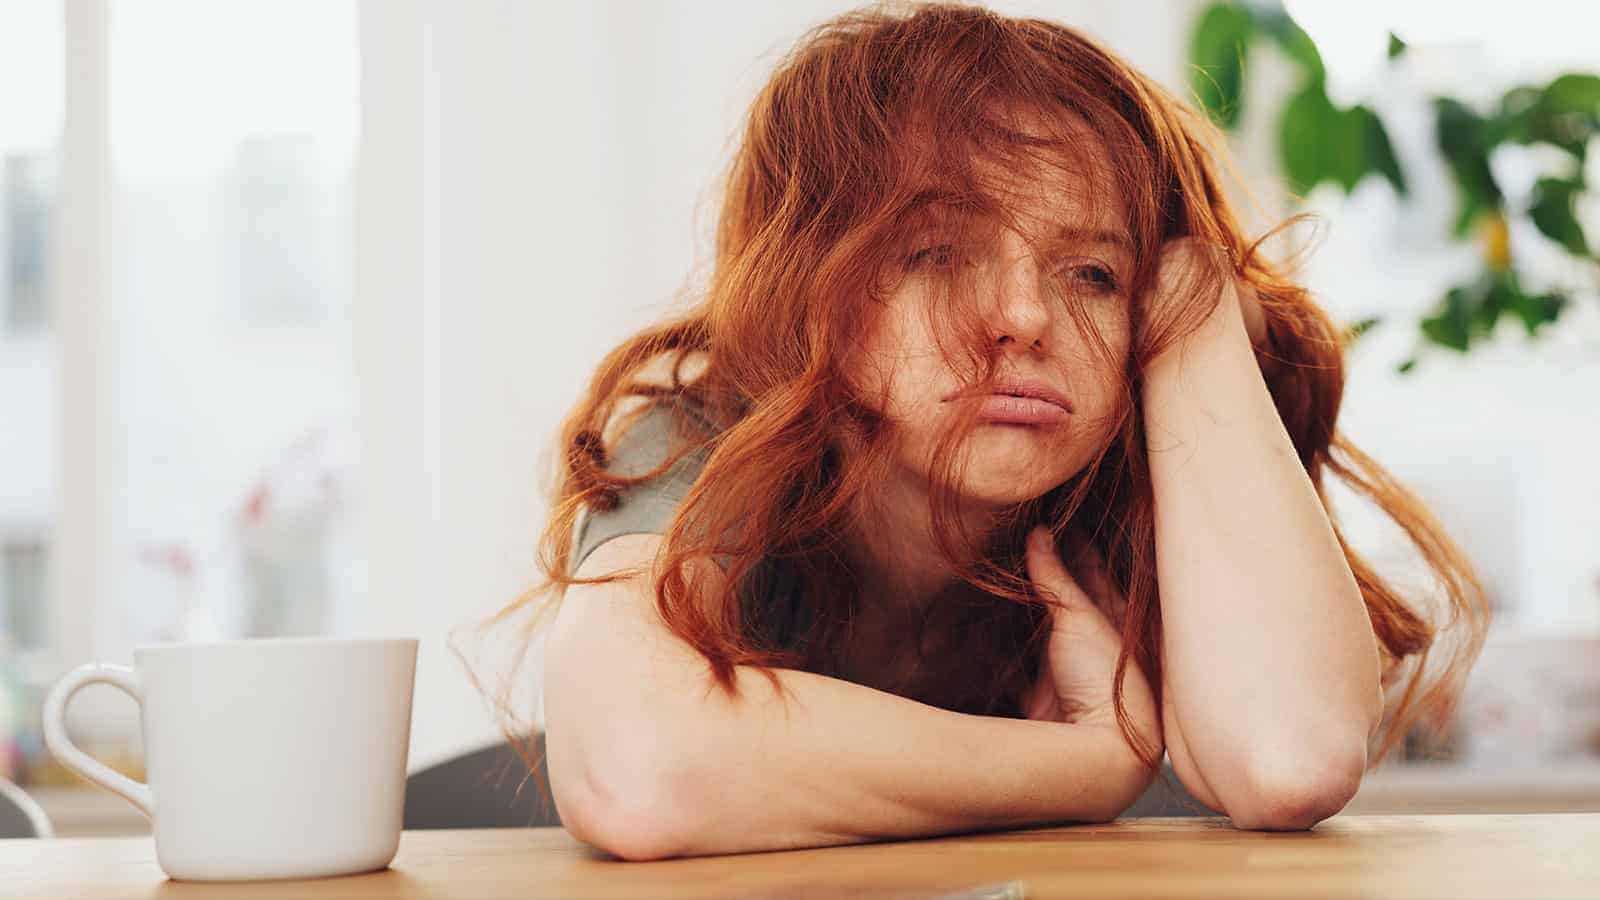 15 Habits That Make You Feel Tired (And How to Fix It)